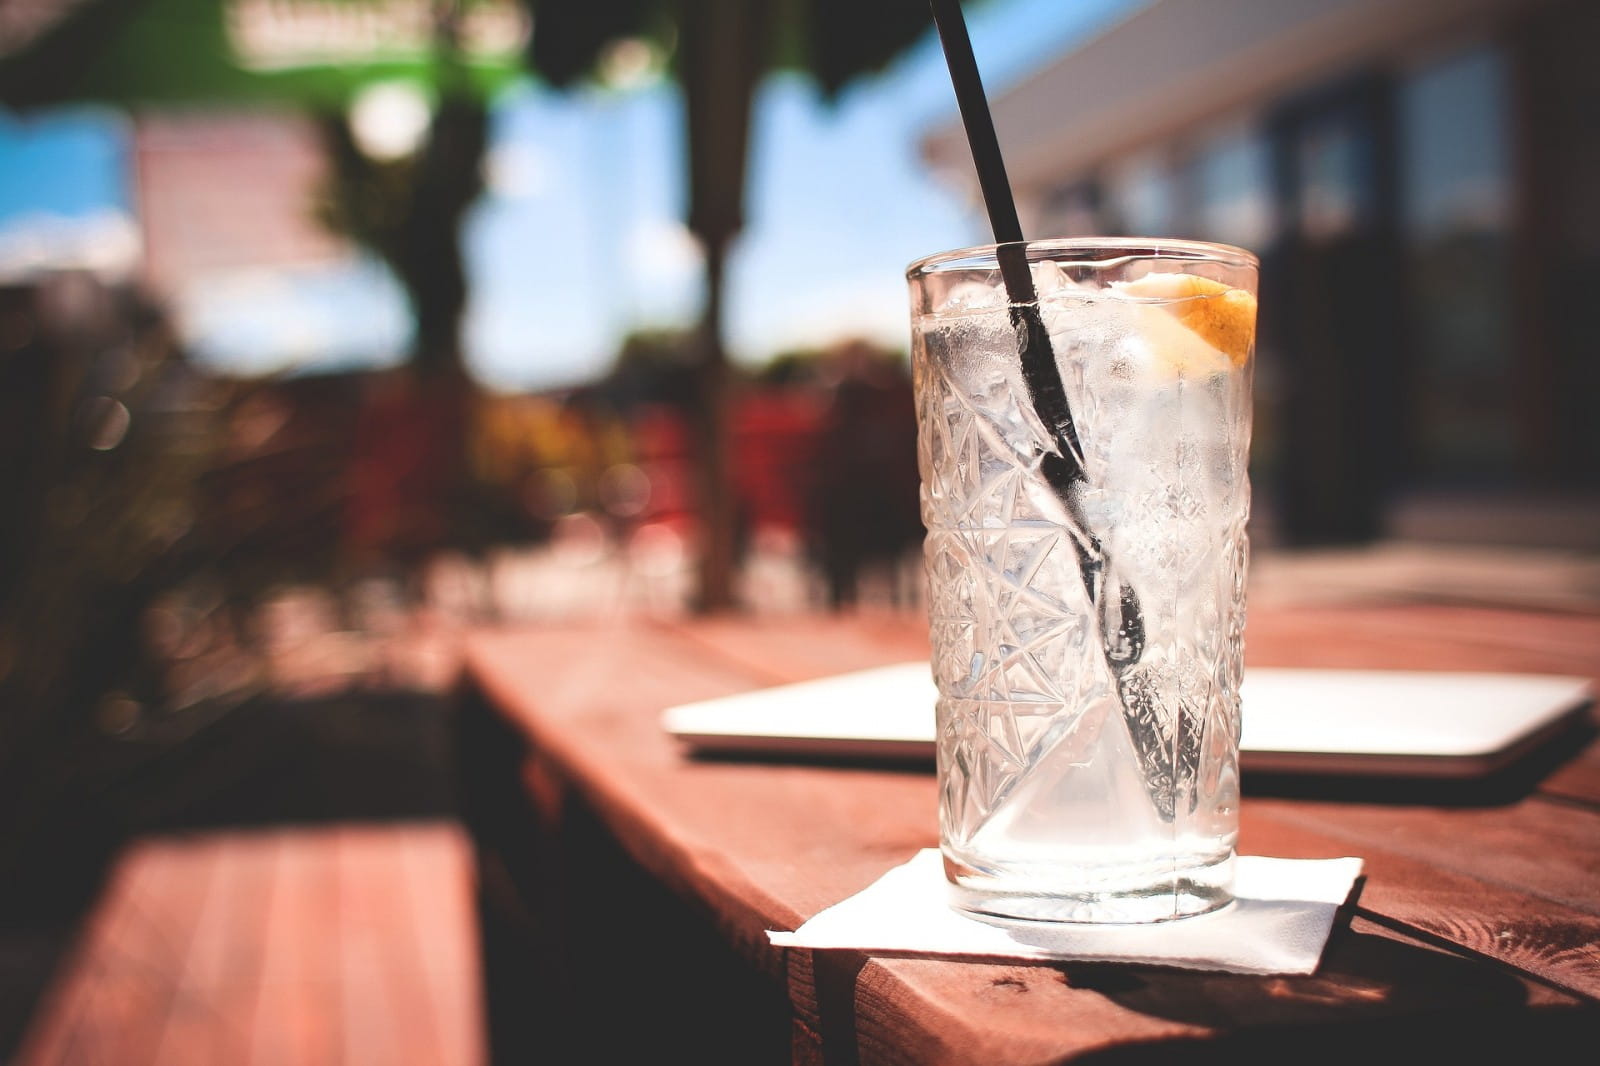 What to drink in a heatwave